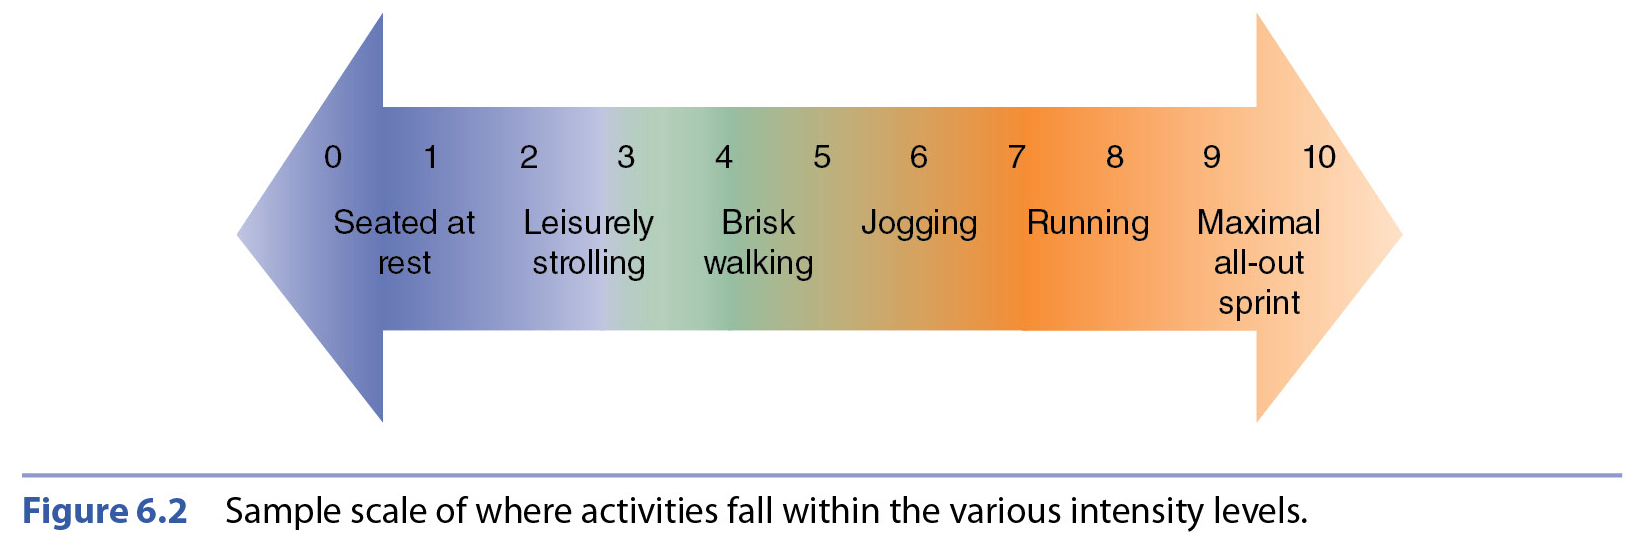 fitness-test-example-of-physical-fitness-test-activities